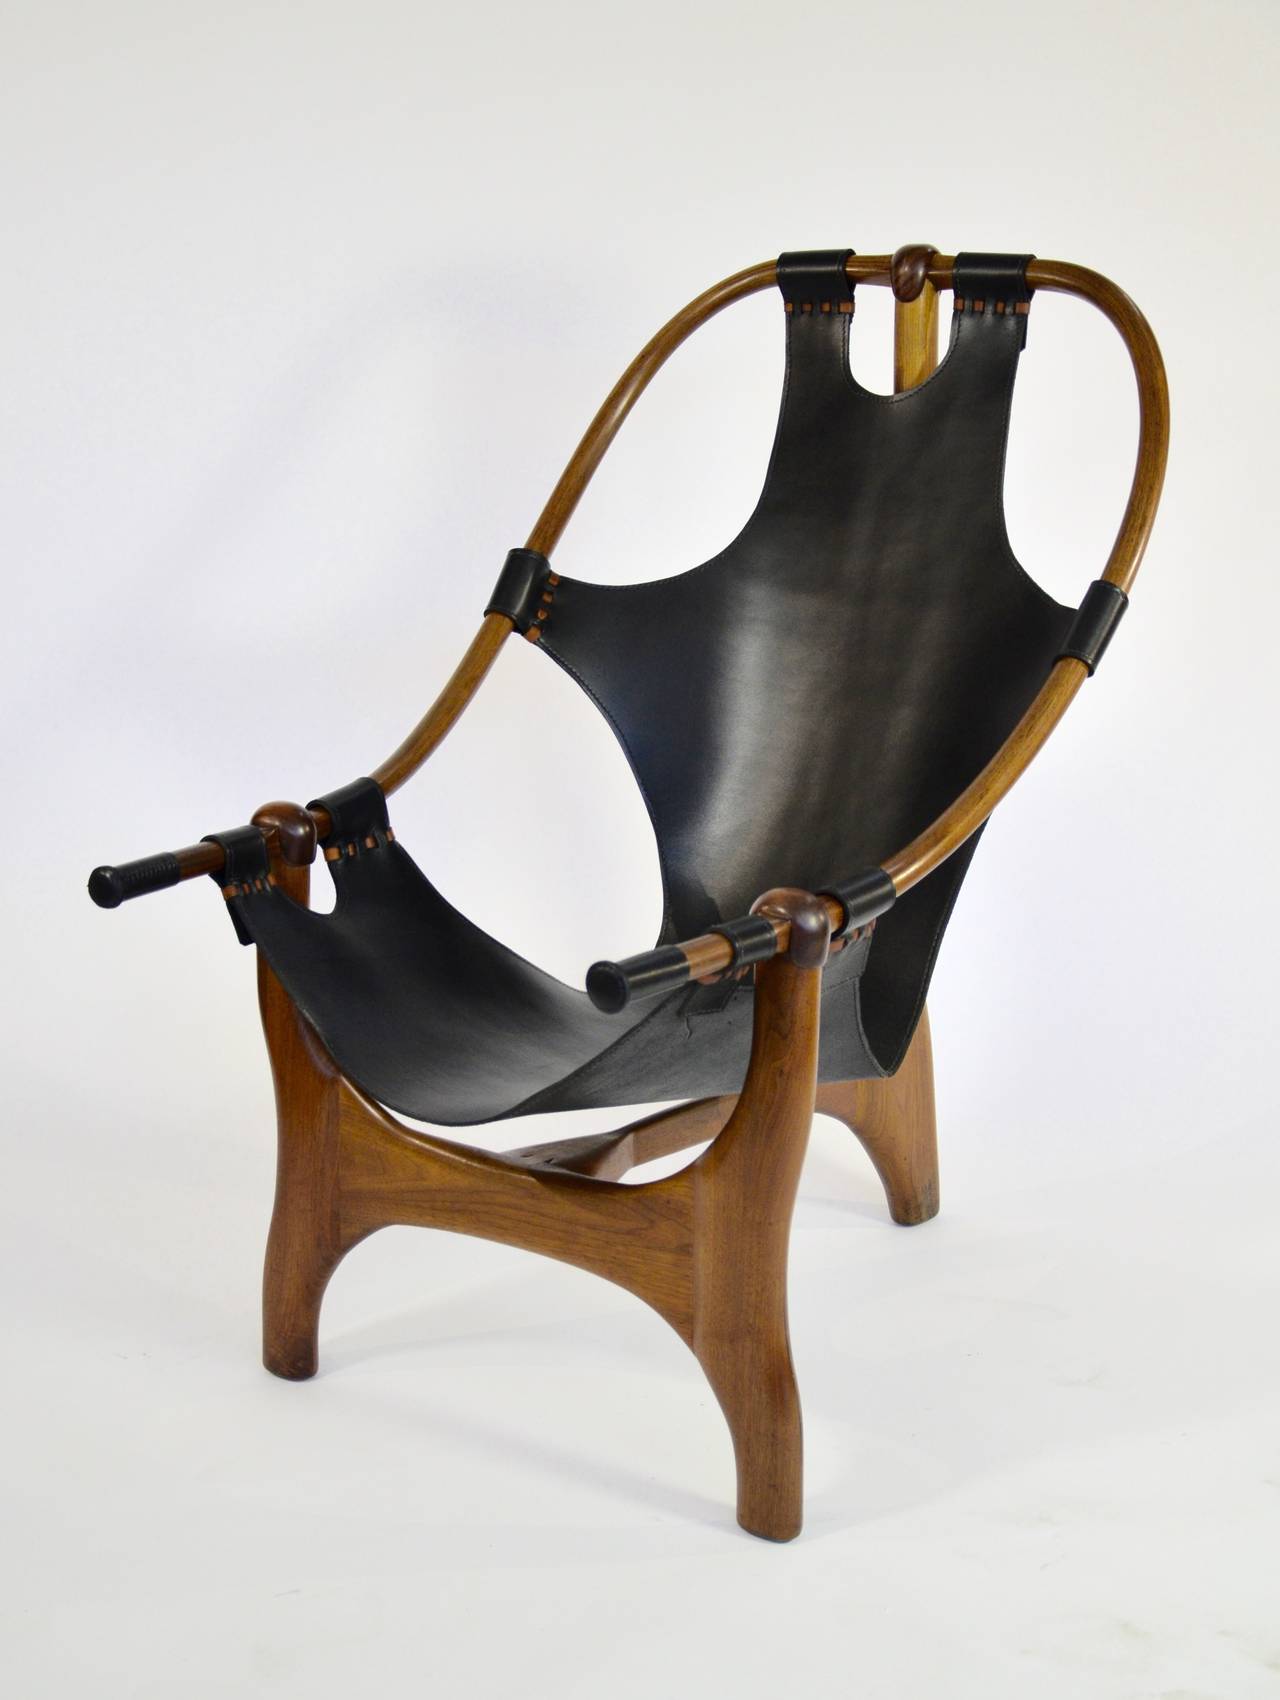 This one of a kind chair was found in Berkeley California, where some amazing Studio furniture was being turned out in the mid-20th century. Built from stacked laminated walnut, this sling design is an engineering marvel. This chair has been